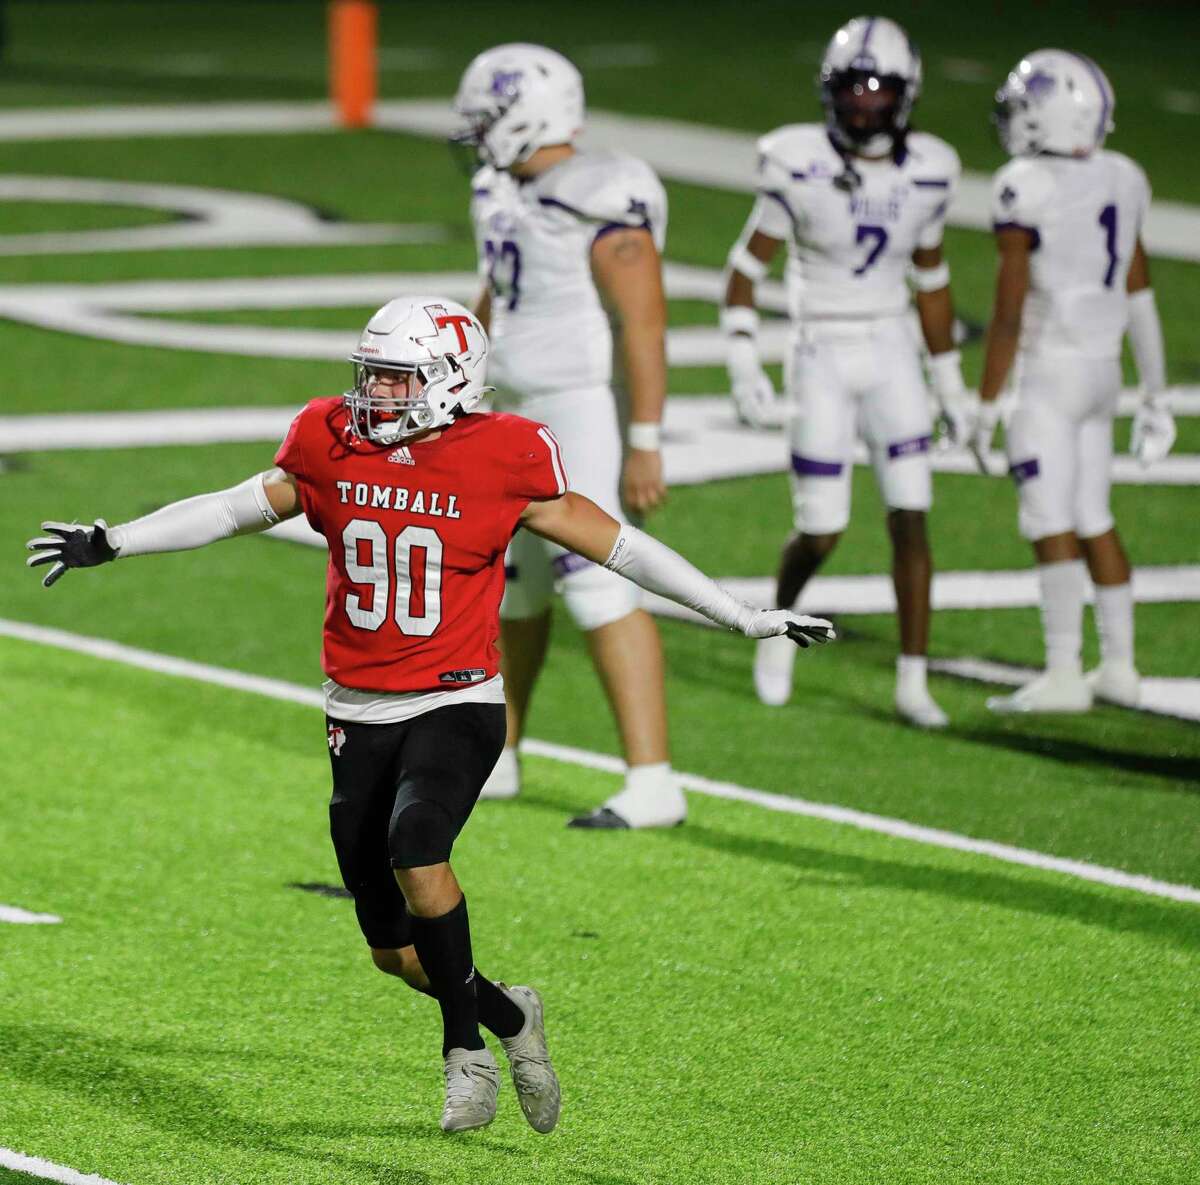 Tomball defensive linemen Cavan Tuley (90) celebrates after recovering a fumble by Willis running back Da'Ontae Fleeks for a 12-yard touchdown during the third quarter of a Region II-6A (Div. II) area football game at Planet Ford Stadium, Friday, Nov. 19, 2021, in Spring.